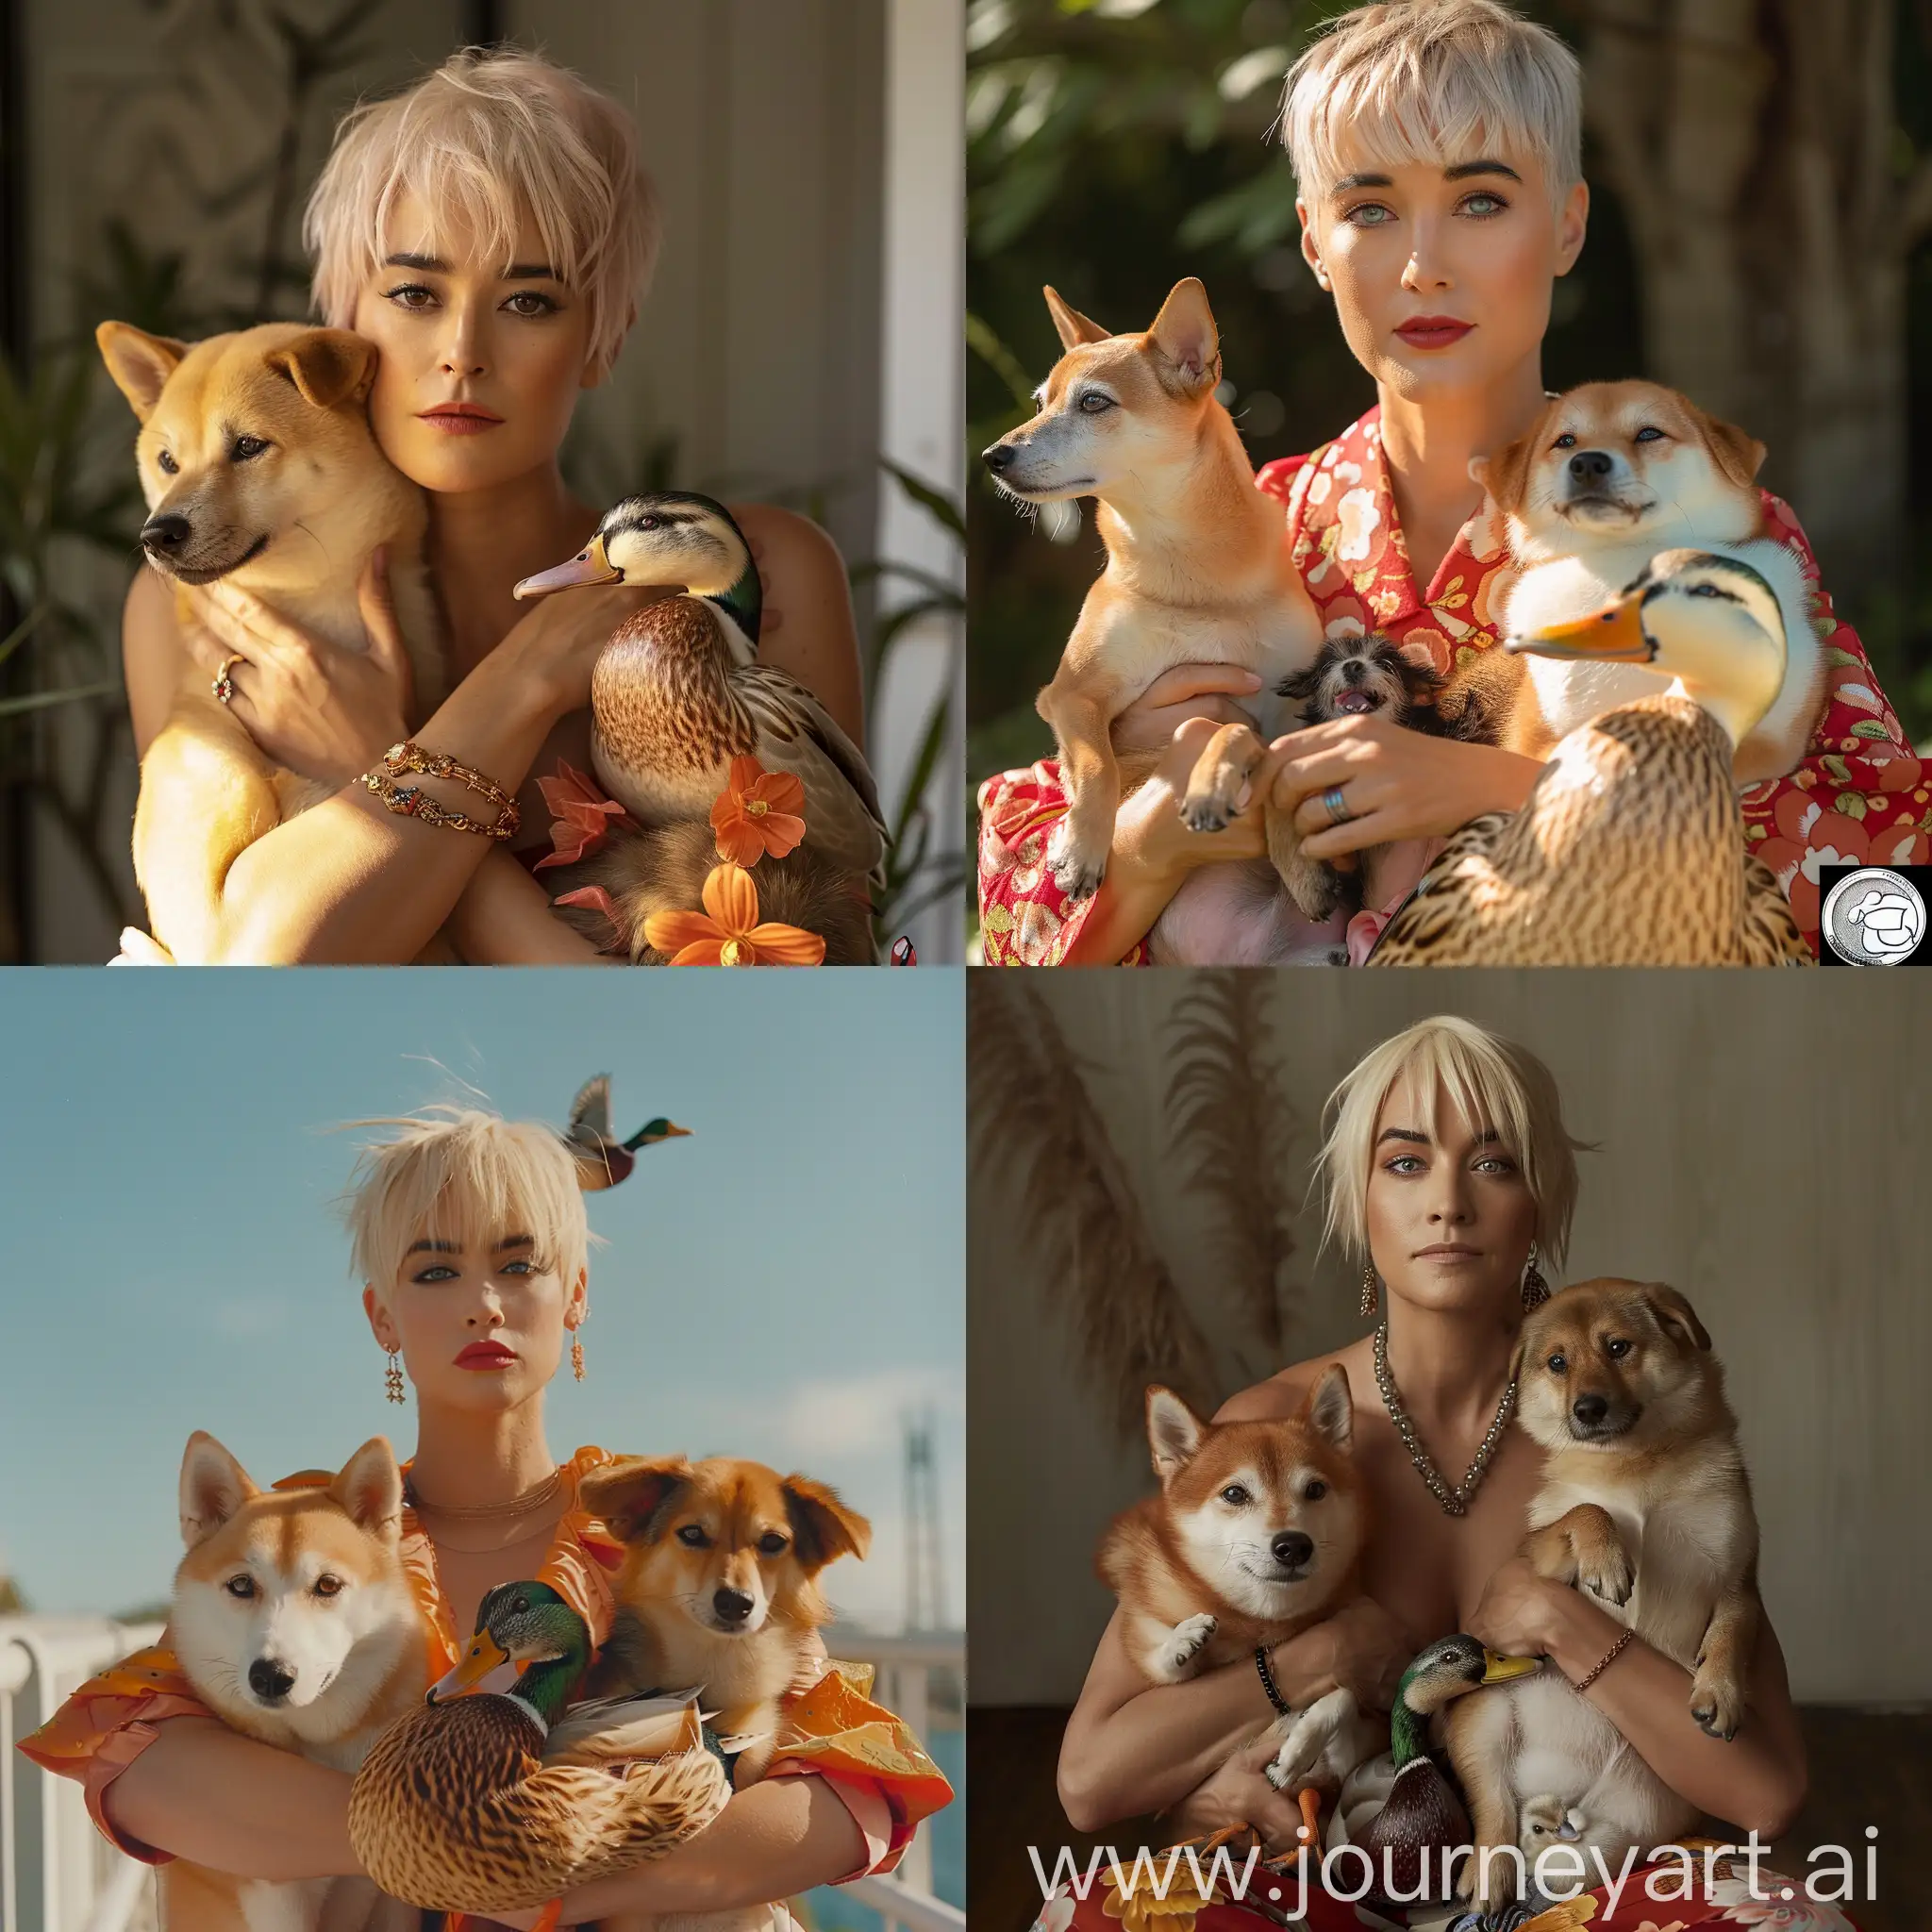 Katy Perry holding a Shiba Inu and a Duck in her arms